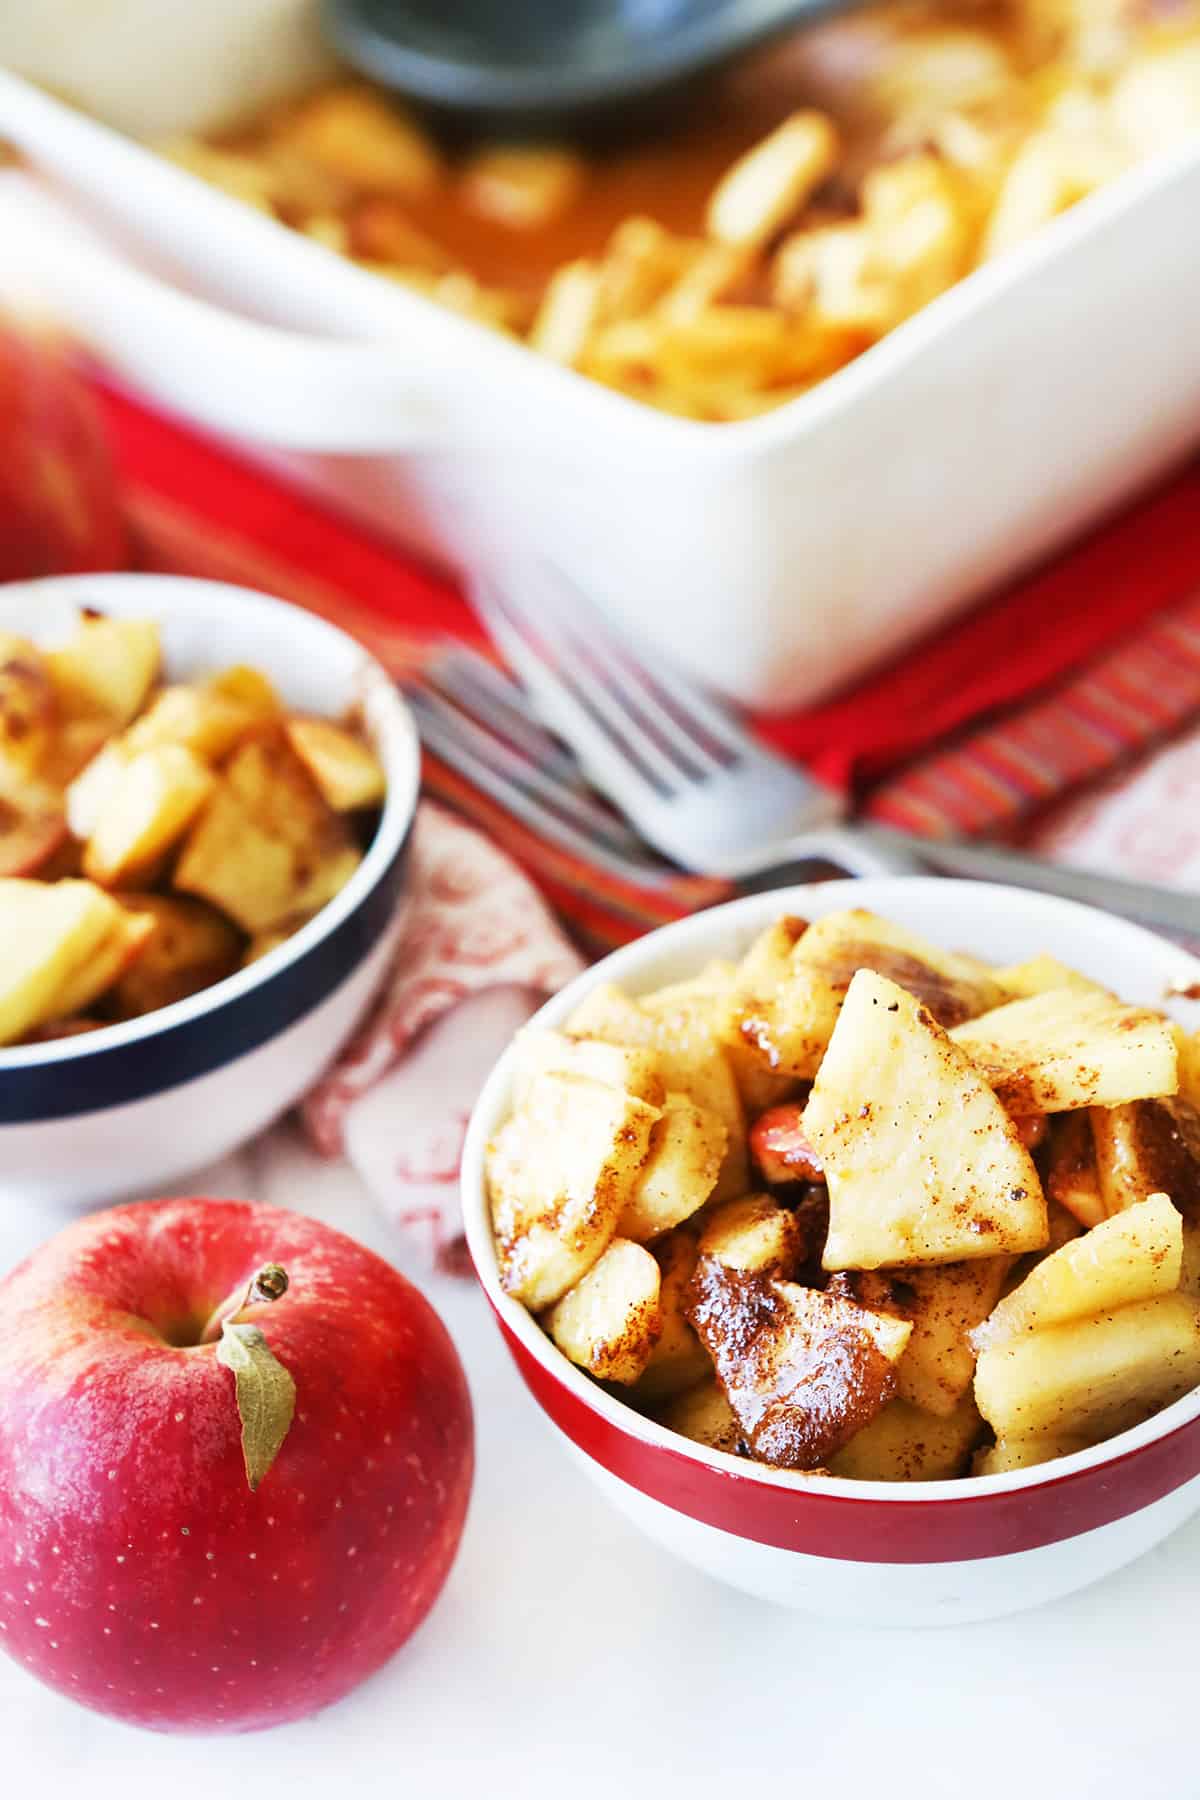 Cinnamon baked apples in serving dishes next to baking pan.